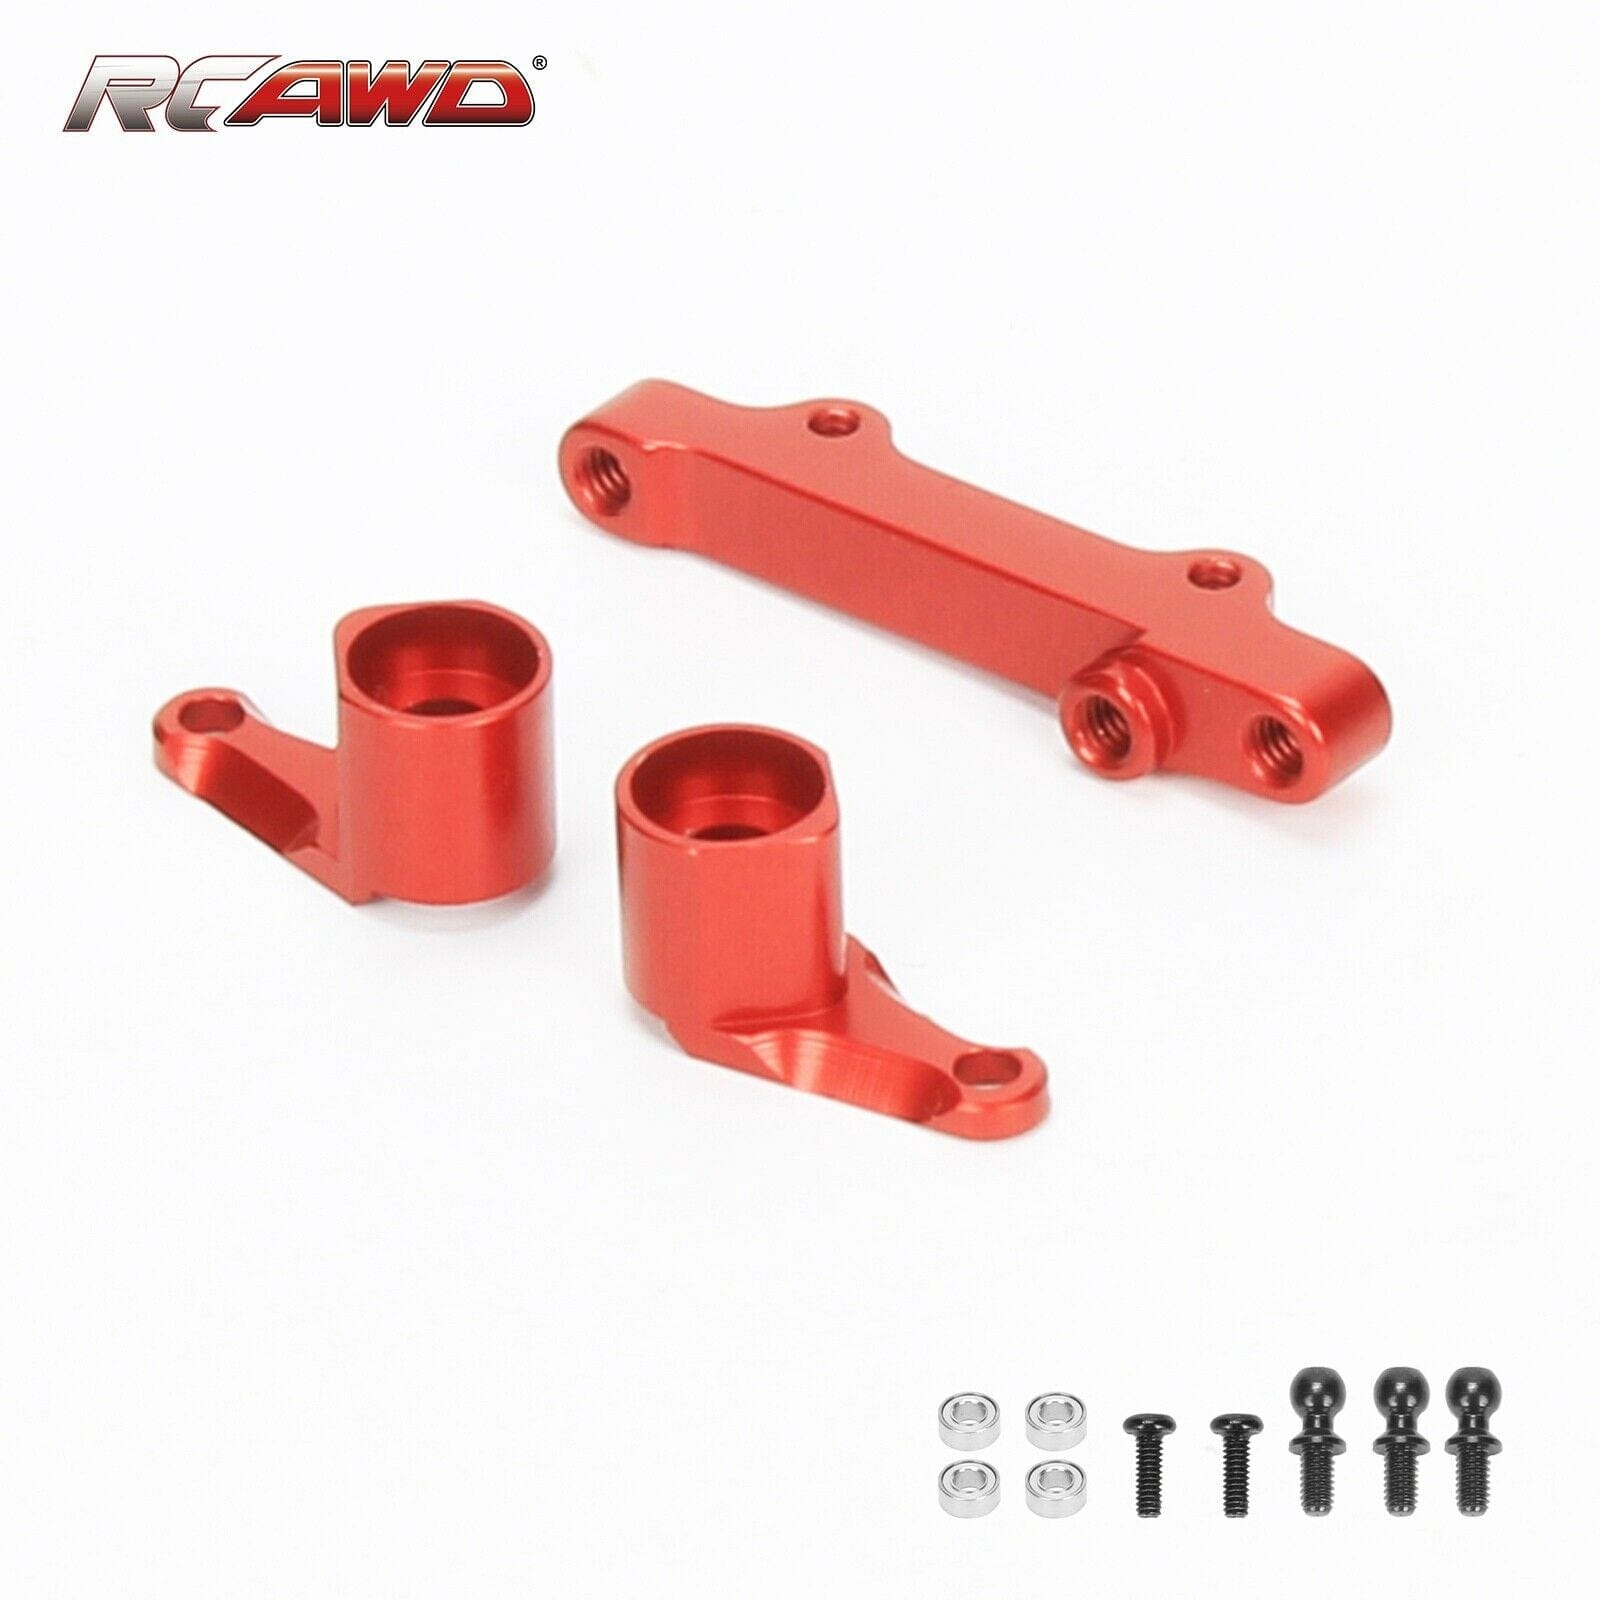 RCAWD Mini Buggy/Tuggy Bellcranks and Drag Link LOS311002 - RCAWD